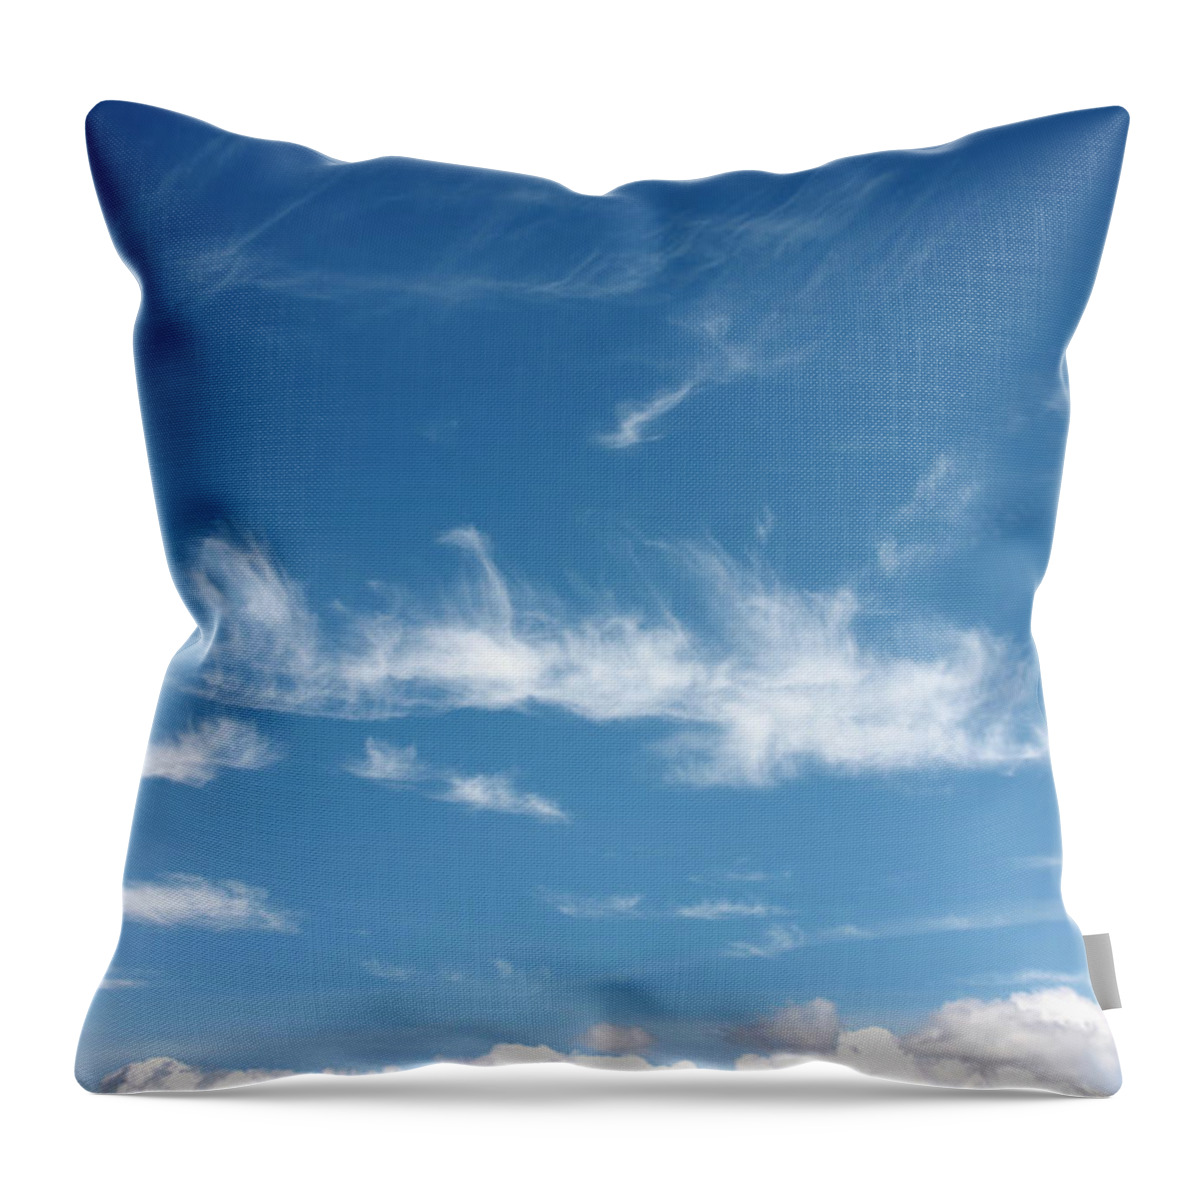 Scenics Throw Pillow featuring the photograph Cloudscape by Andrew Holt